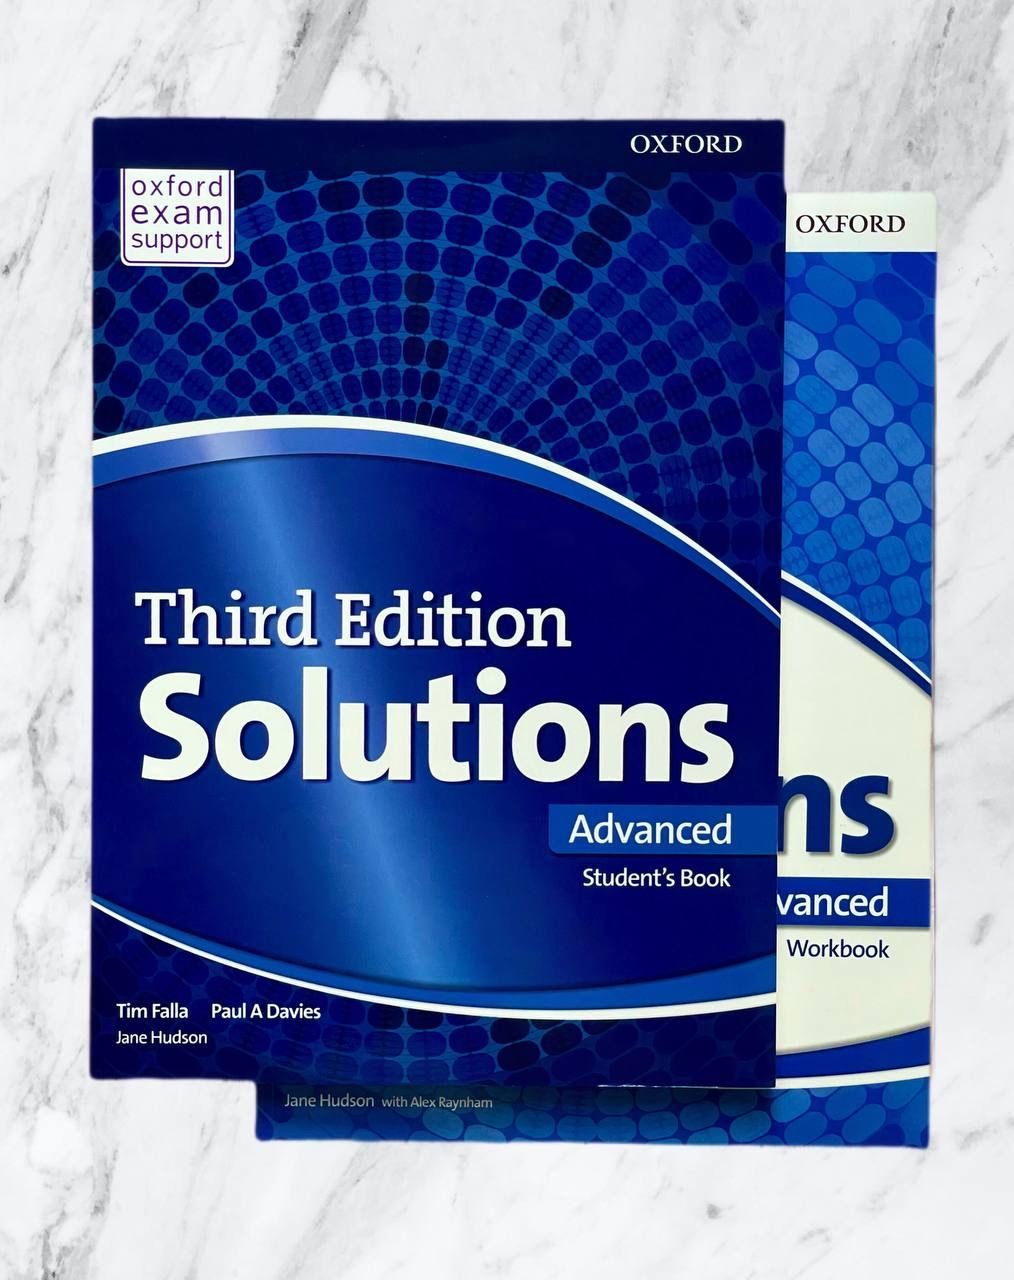 Solutions levels. Solutions: Advanced. Solutions English book 10. Solutions Insight English.